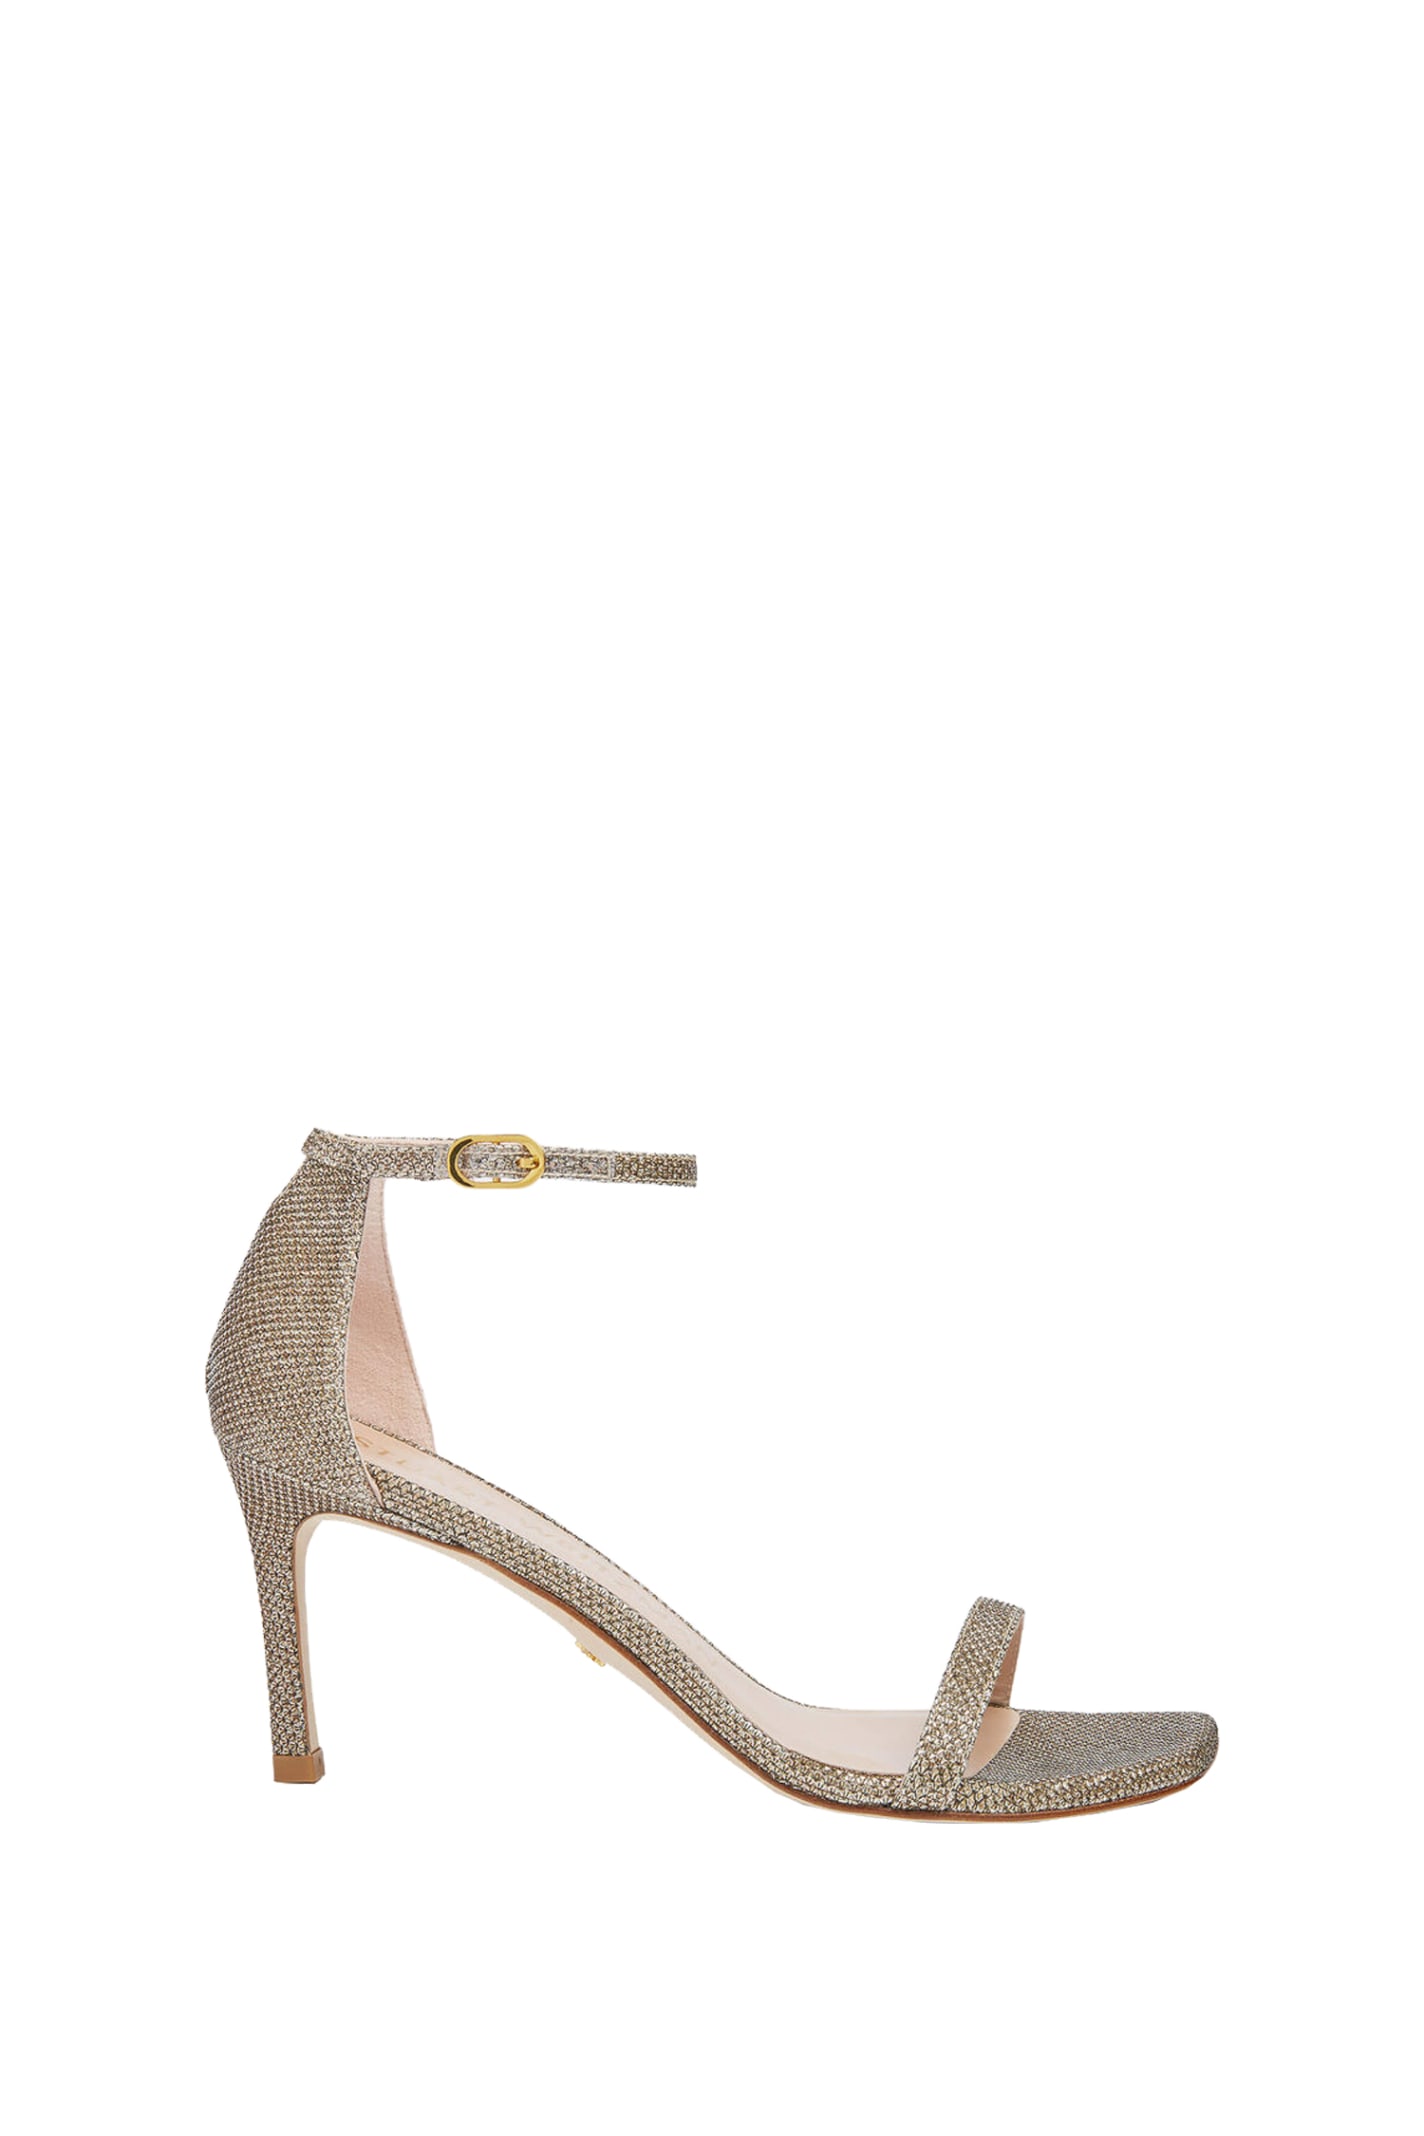 Stuart Weitzman Shoes With Heels In Champagne